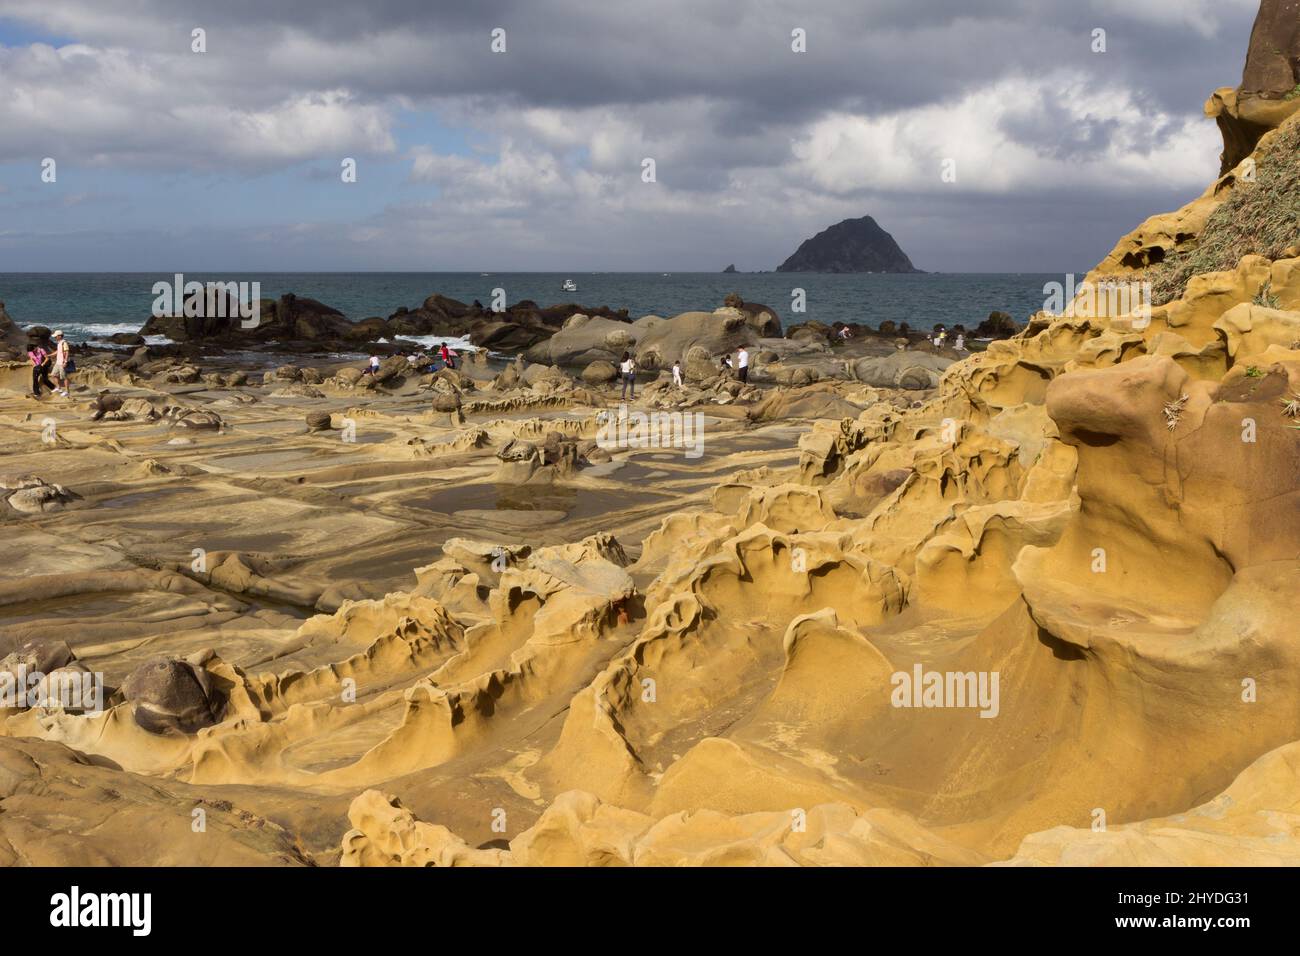 People at the bizarre rocky terrain and rock formations at the Heping (Hoping) Island Park (also known as Peace Island Park) in Keelung, Taiwan. Stock Photo